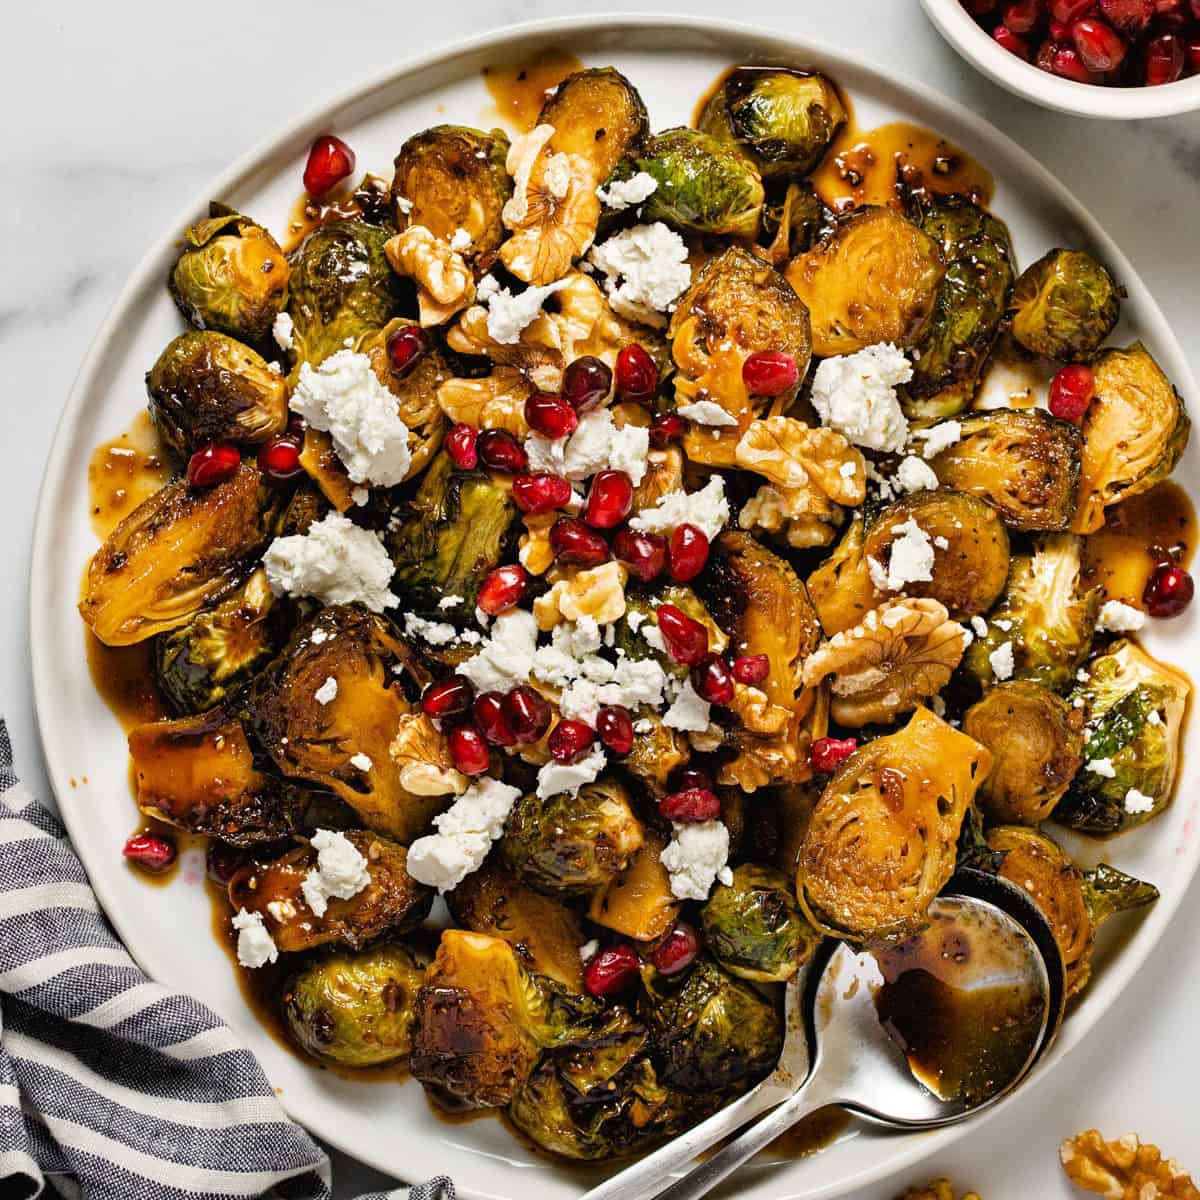 Balsamic Glazed Brussel Sprouts